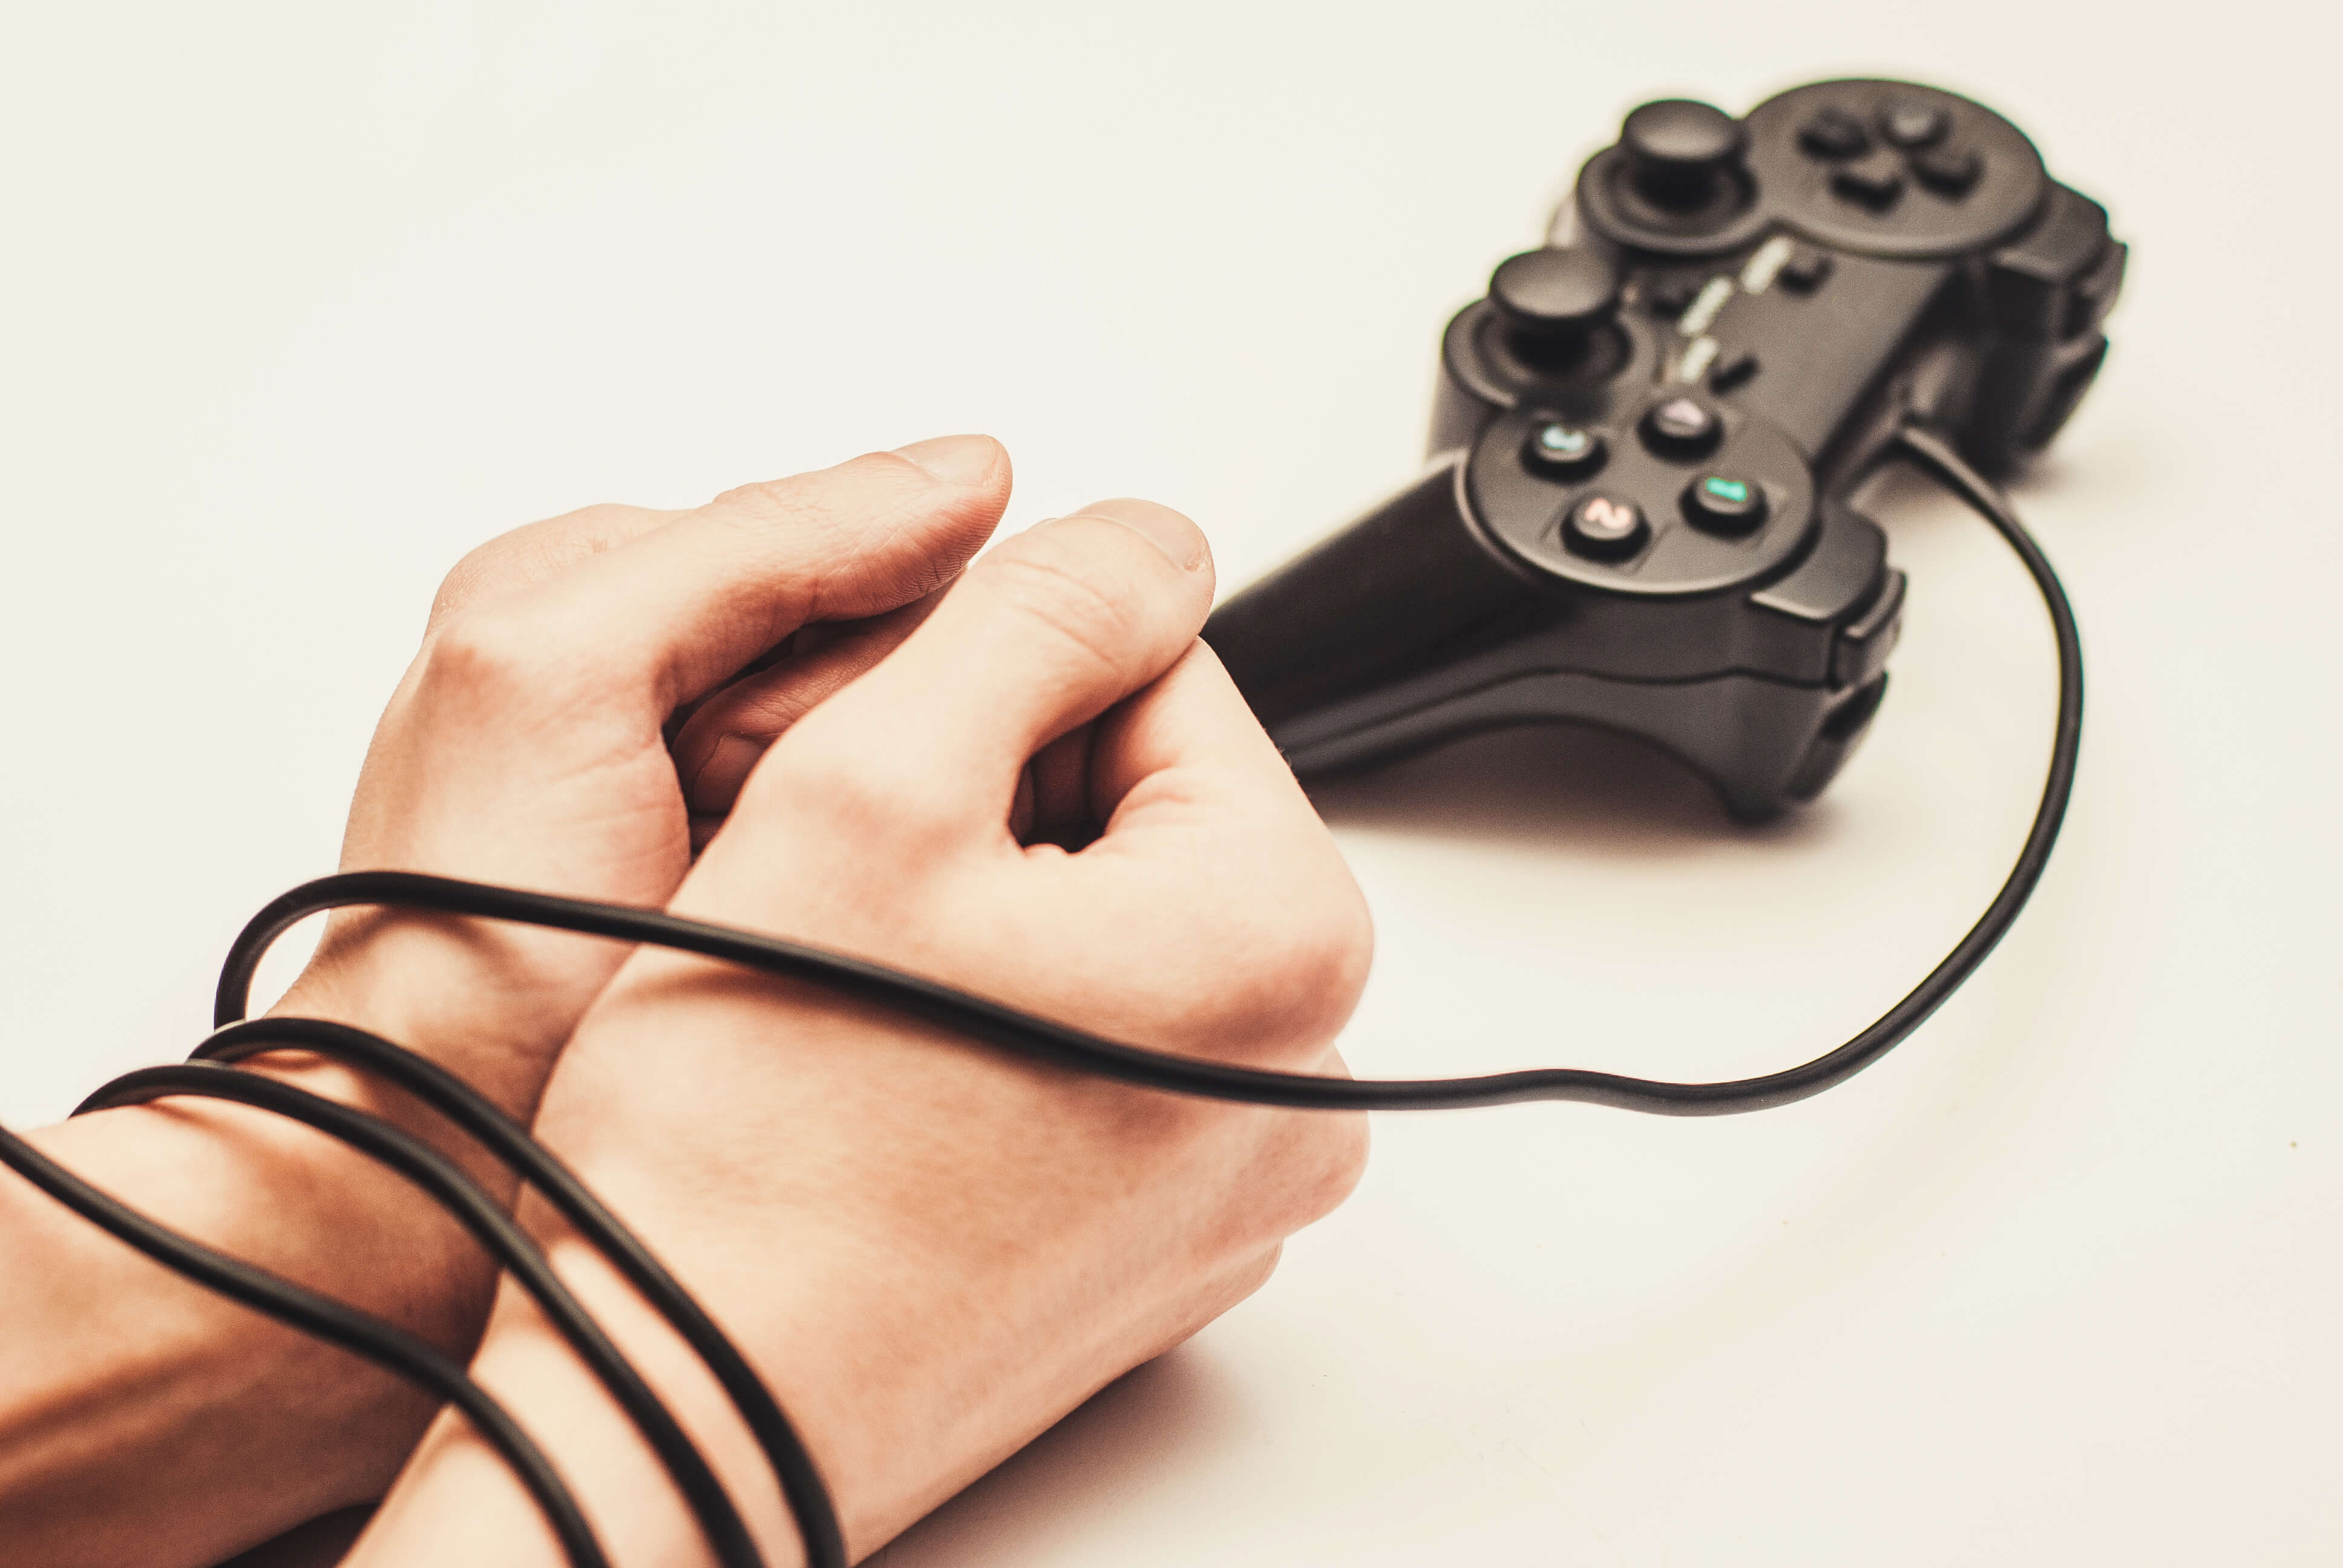 video game addiction represented by controller wire wrapped around young man's wrists